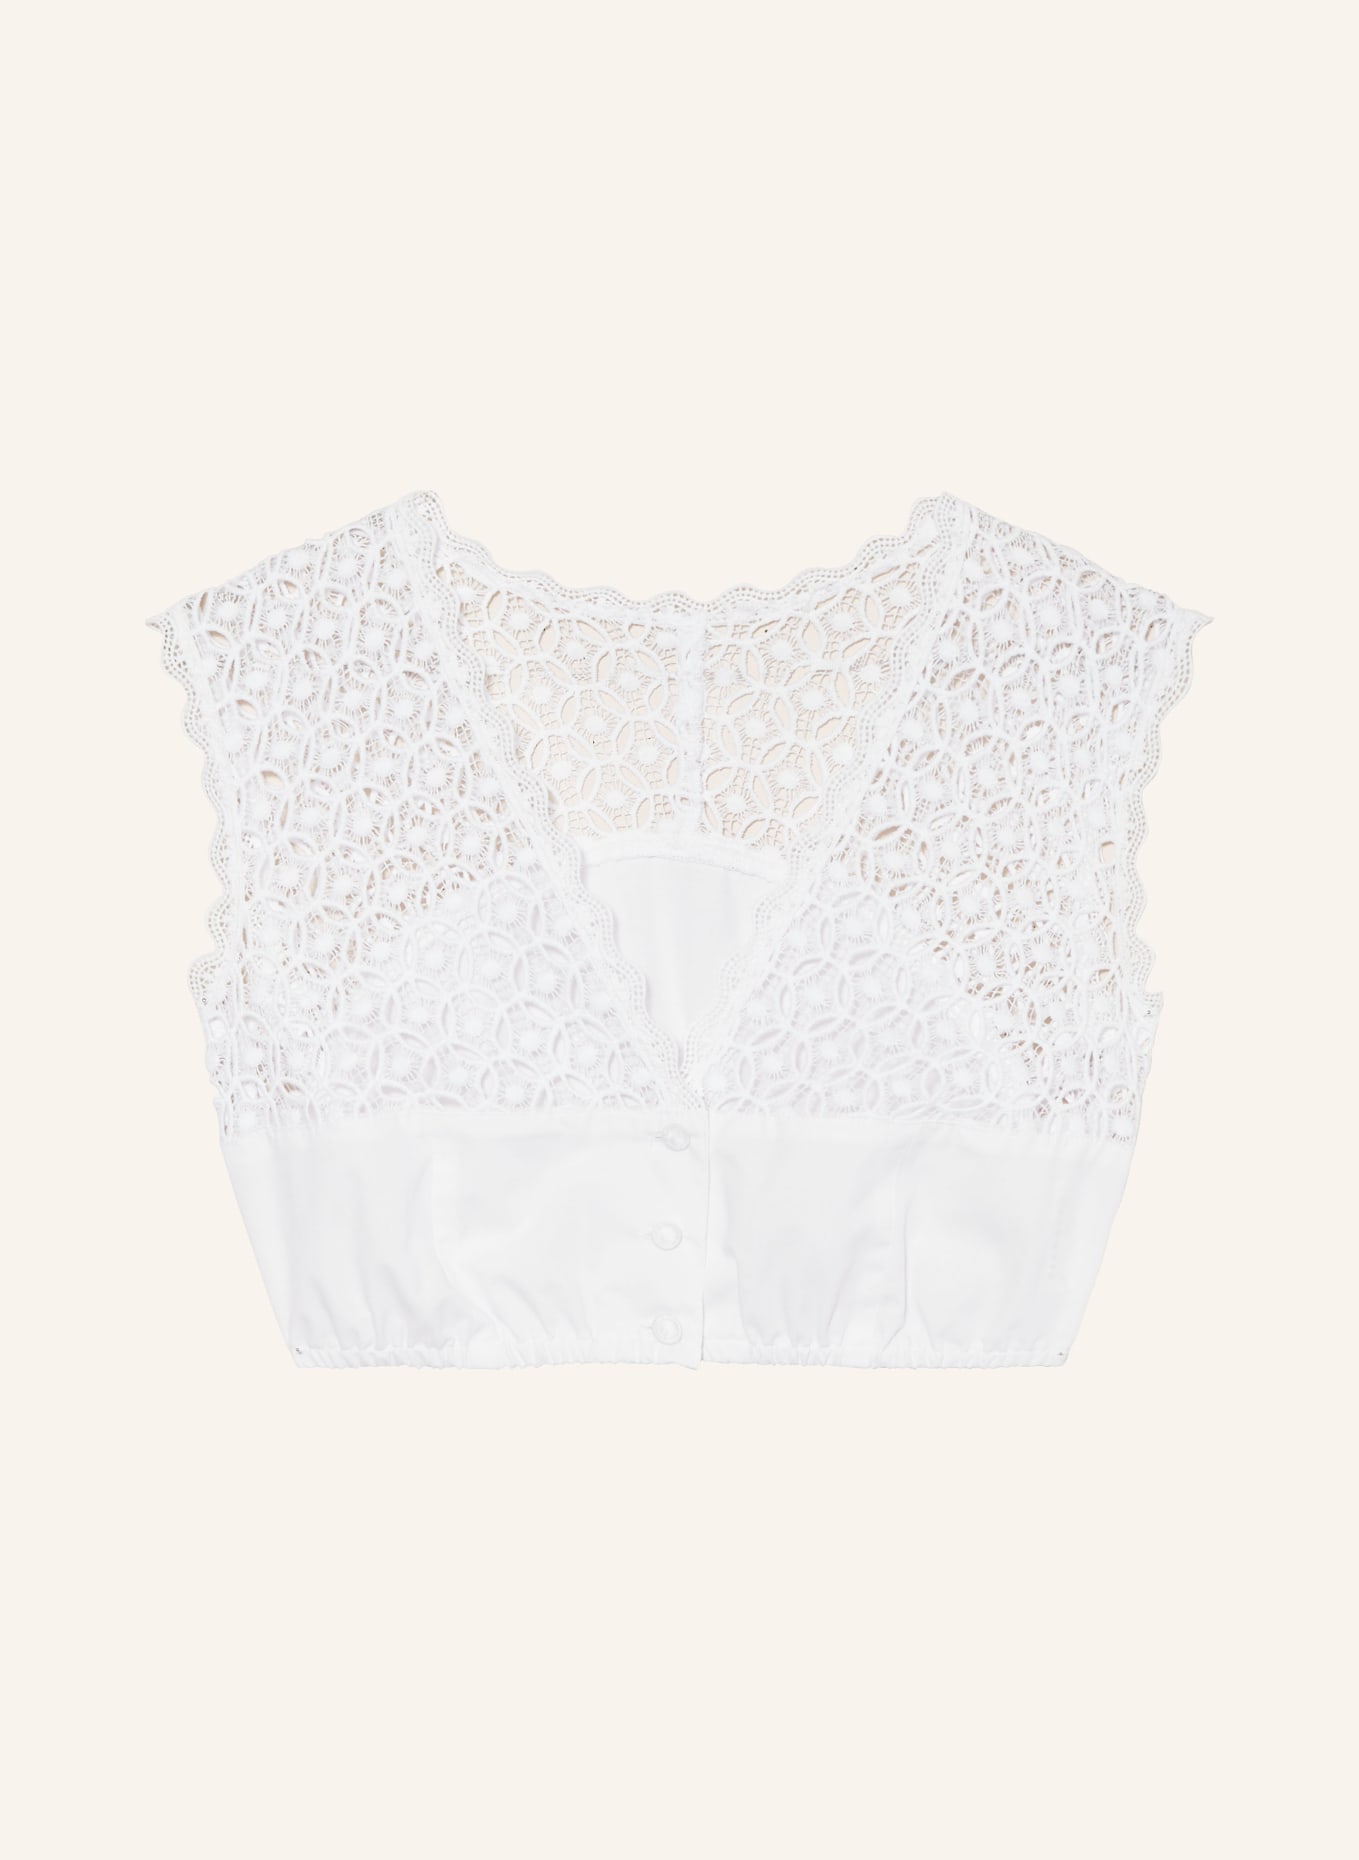 WALDORFF Dirndl blouse with crochet lace, Color: WHITE (Image 1)